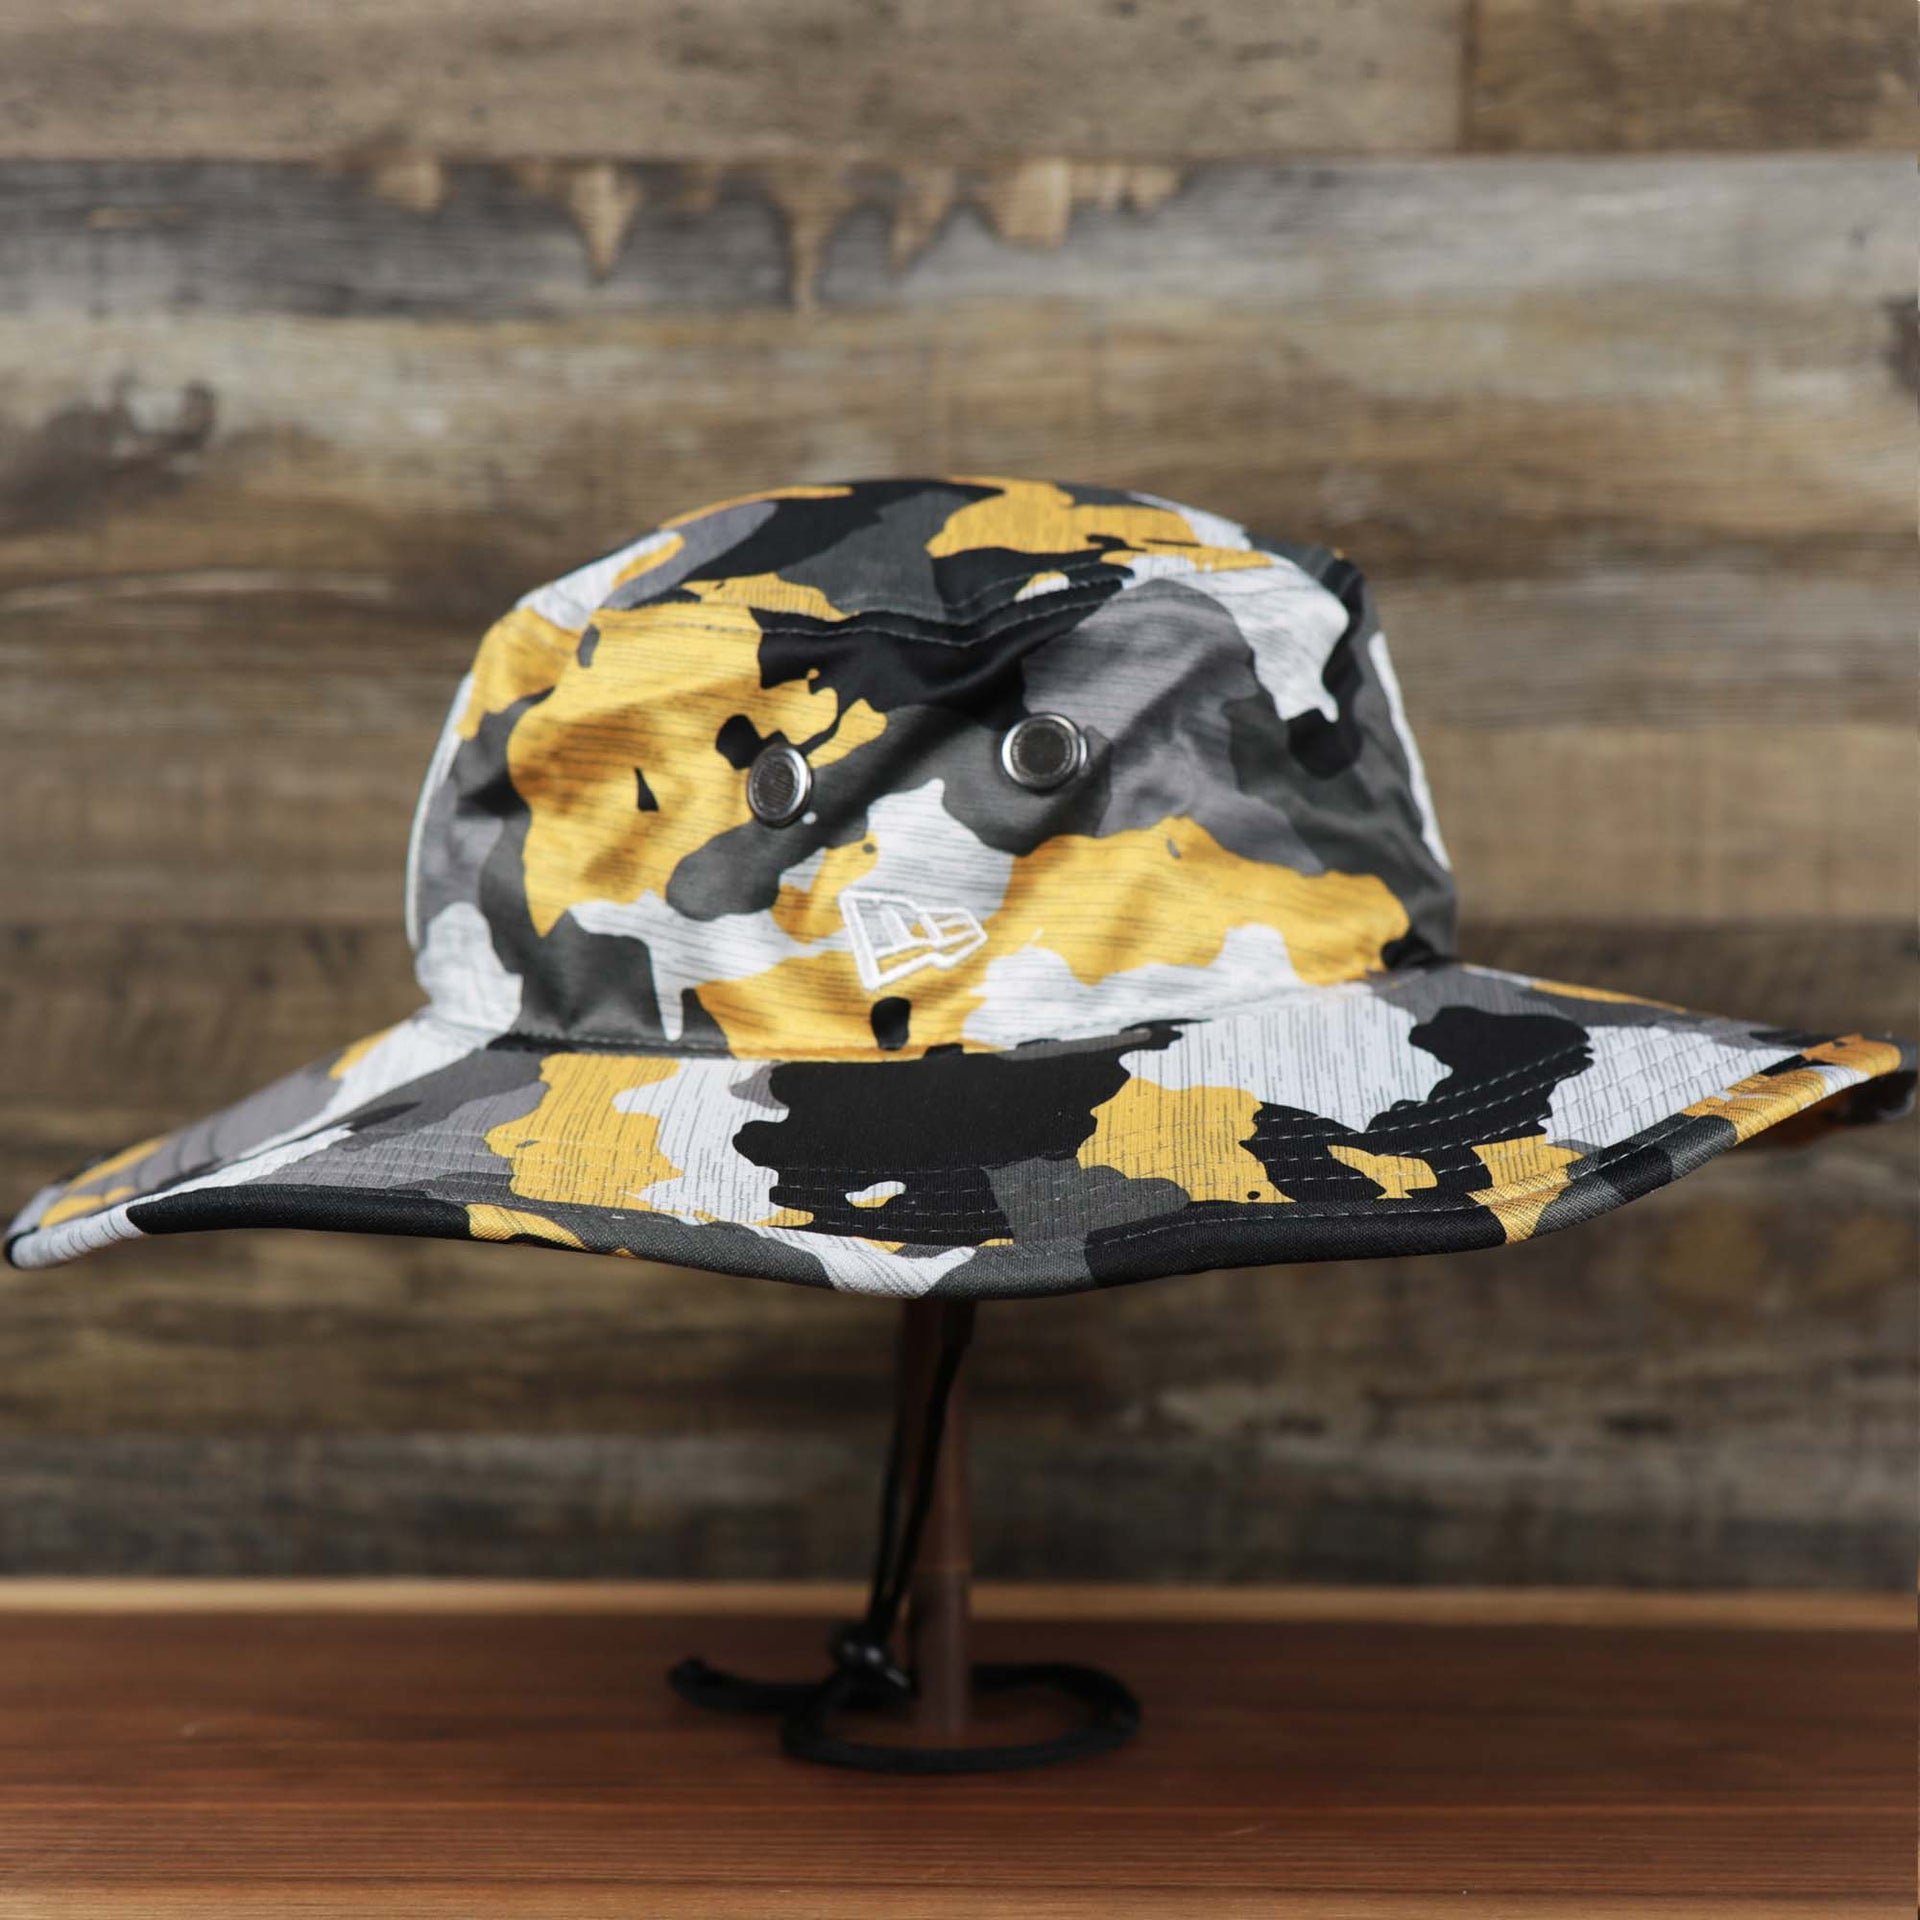 The wearer's left on the Pittsburgh Steelers NFL Summer Training Camp 2022 Camo Bucket Hat | Yellow Bucket Hat